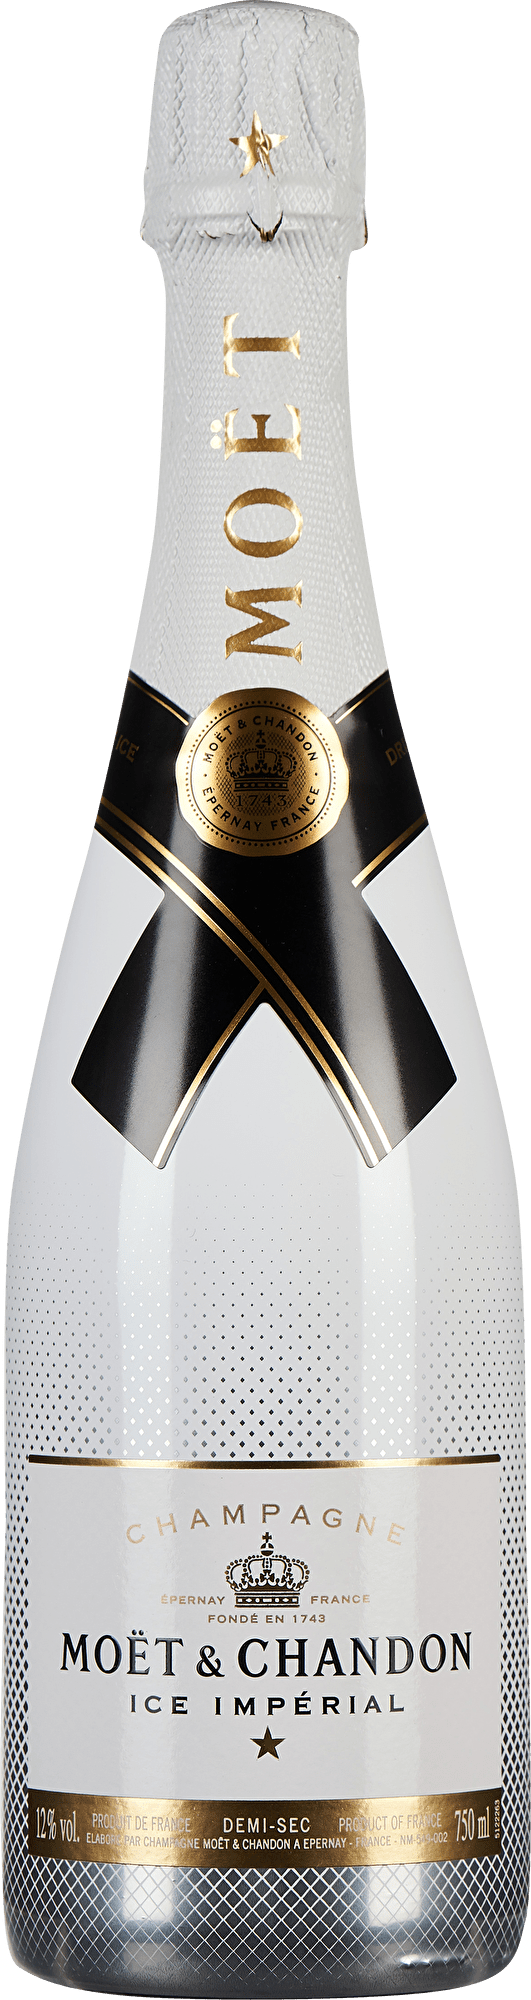 Read more about the article Moet Chandon Ice Imperial